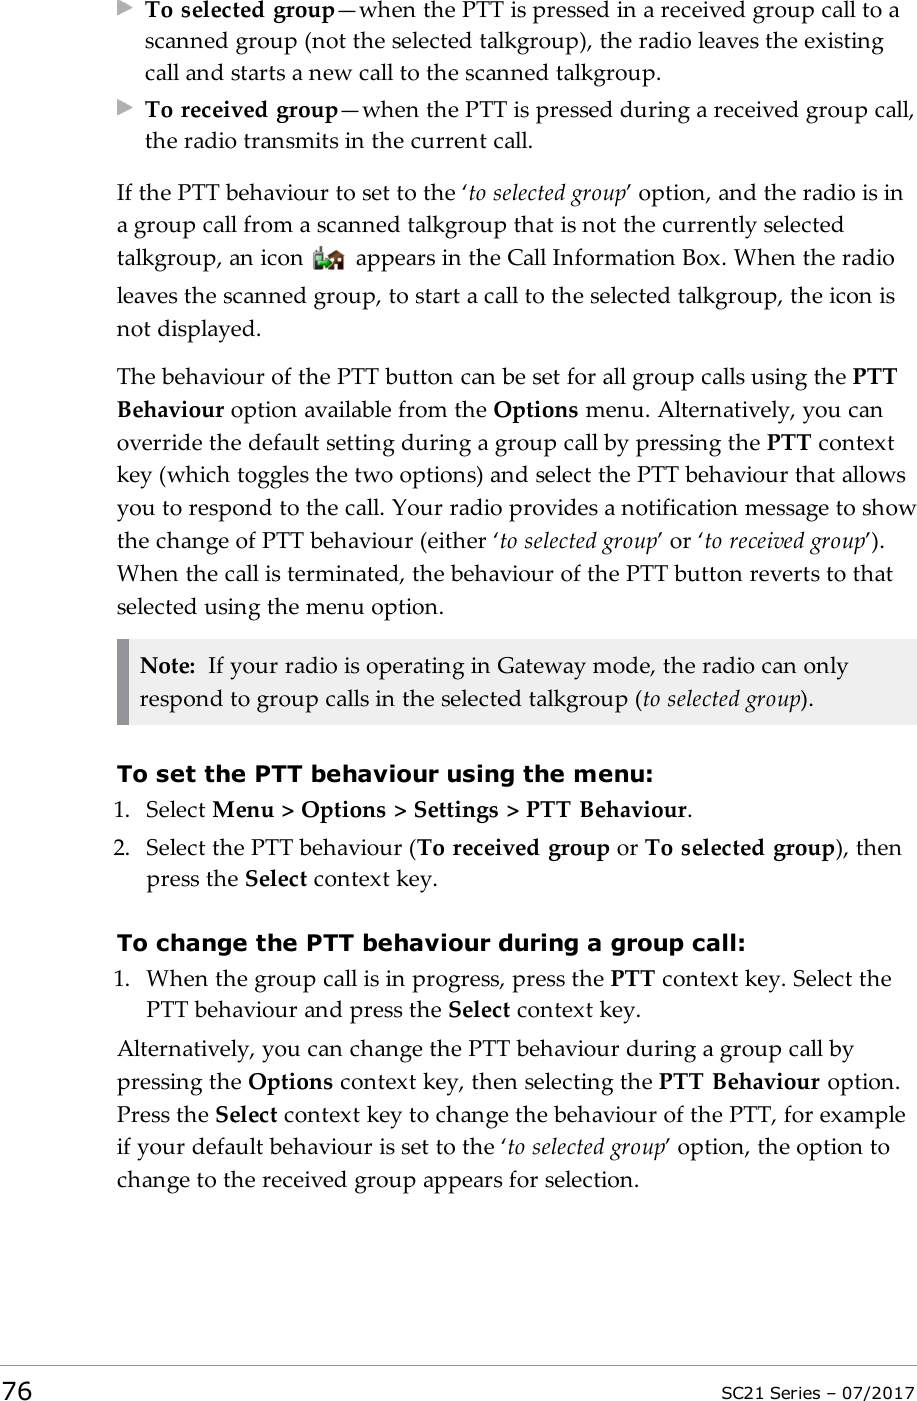 To selected group—when the PTT is pressed in a received group call to ascanned group (not the selected talkgroup), the radio leaves the existingcall and starts a new call to the scanned talkgroup.To received group—when the PTT is pressed during a received group call,the radio transmits in the current call.If the PTT behaviour to set to the ‘to selected group’ option, and the radio is ina group call from a scanned talkgroup that is not the currently selectedtalkgroup, an icon appears in the Call Information Box. When the radioleaves the scanned group, to start a call to the selected talkgroup, the icon isnot displayed.The behaviour of the PTT button can be set for all group calls using the PTTBehaviour option available from the Options menu. Alternatively, you canoverride the default setting during a group call by pressing the PTT contextkey (which toggles the two options) and select the PTT behaviour that allowsyou to respond to the call. Your radio provides a notification message to showthe change of PTT behaviour (either ‘to selected group’ or ‘to received group’).When the call is terminated, the behaviour of the PTT button reverts to thatselected using the menu option.Note: If your radio is operating in Gateway mode, the radio can onlyrespond to group calls in the selected talkgroup (to selected group).To set the PTT behaviour using the menu:1. Select Menu &gt; Options &gt; Settings &gt; PTT Behaviour.2. Select the PTT behaviour (To received group or To selected group), thenpress the Select context key.To change the PTTbehaviour during a group call:1. When the group call is in progress, press the PTT context key. Select thePTT behaviour and press the Select context key.Alternatively, you can change the PTT behaviour during a group call bypressing the Options context key, then selecting the PTT Behaviour option.Press the Select context key to change the behaviour of the PTT, for exampleif your default behaviour is set to the ‘to selected group’ option, the option tochange to the received group appears for selection.76 SC21 Series – 07/2017